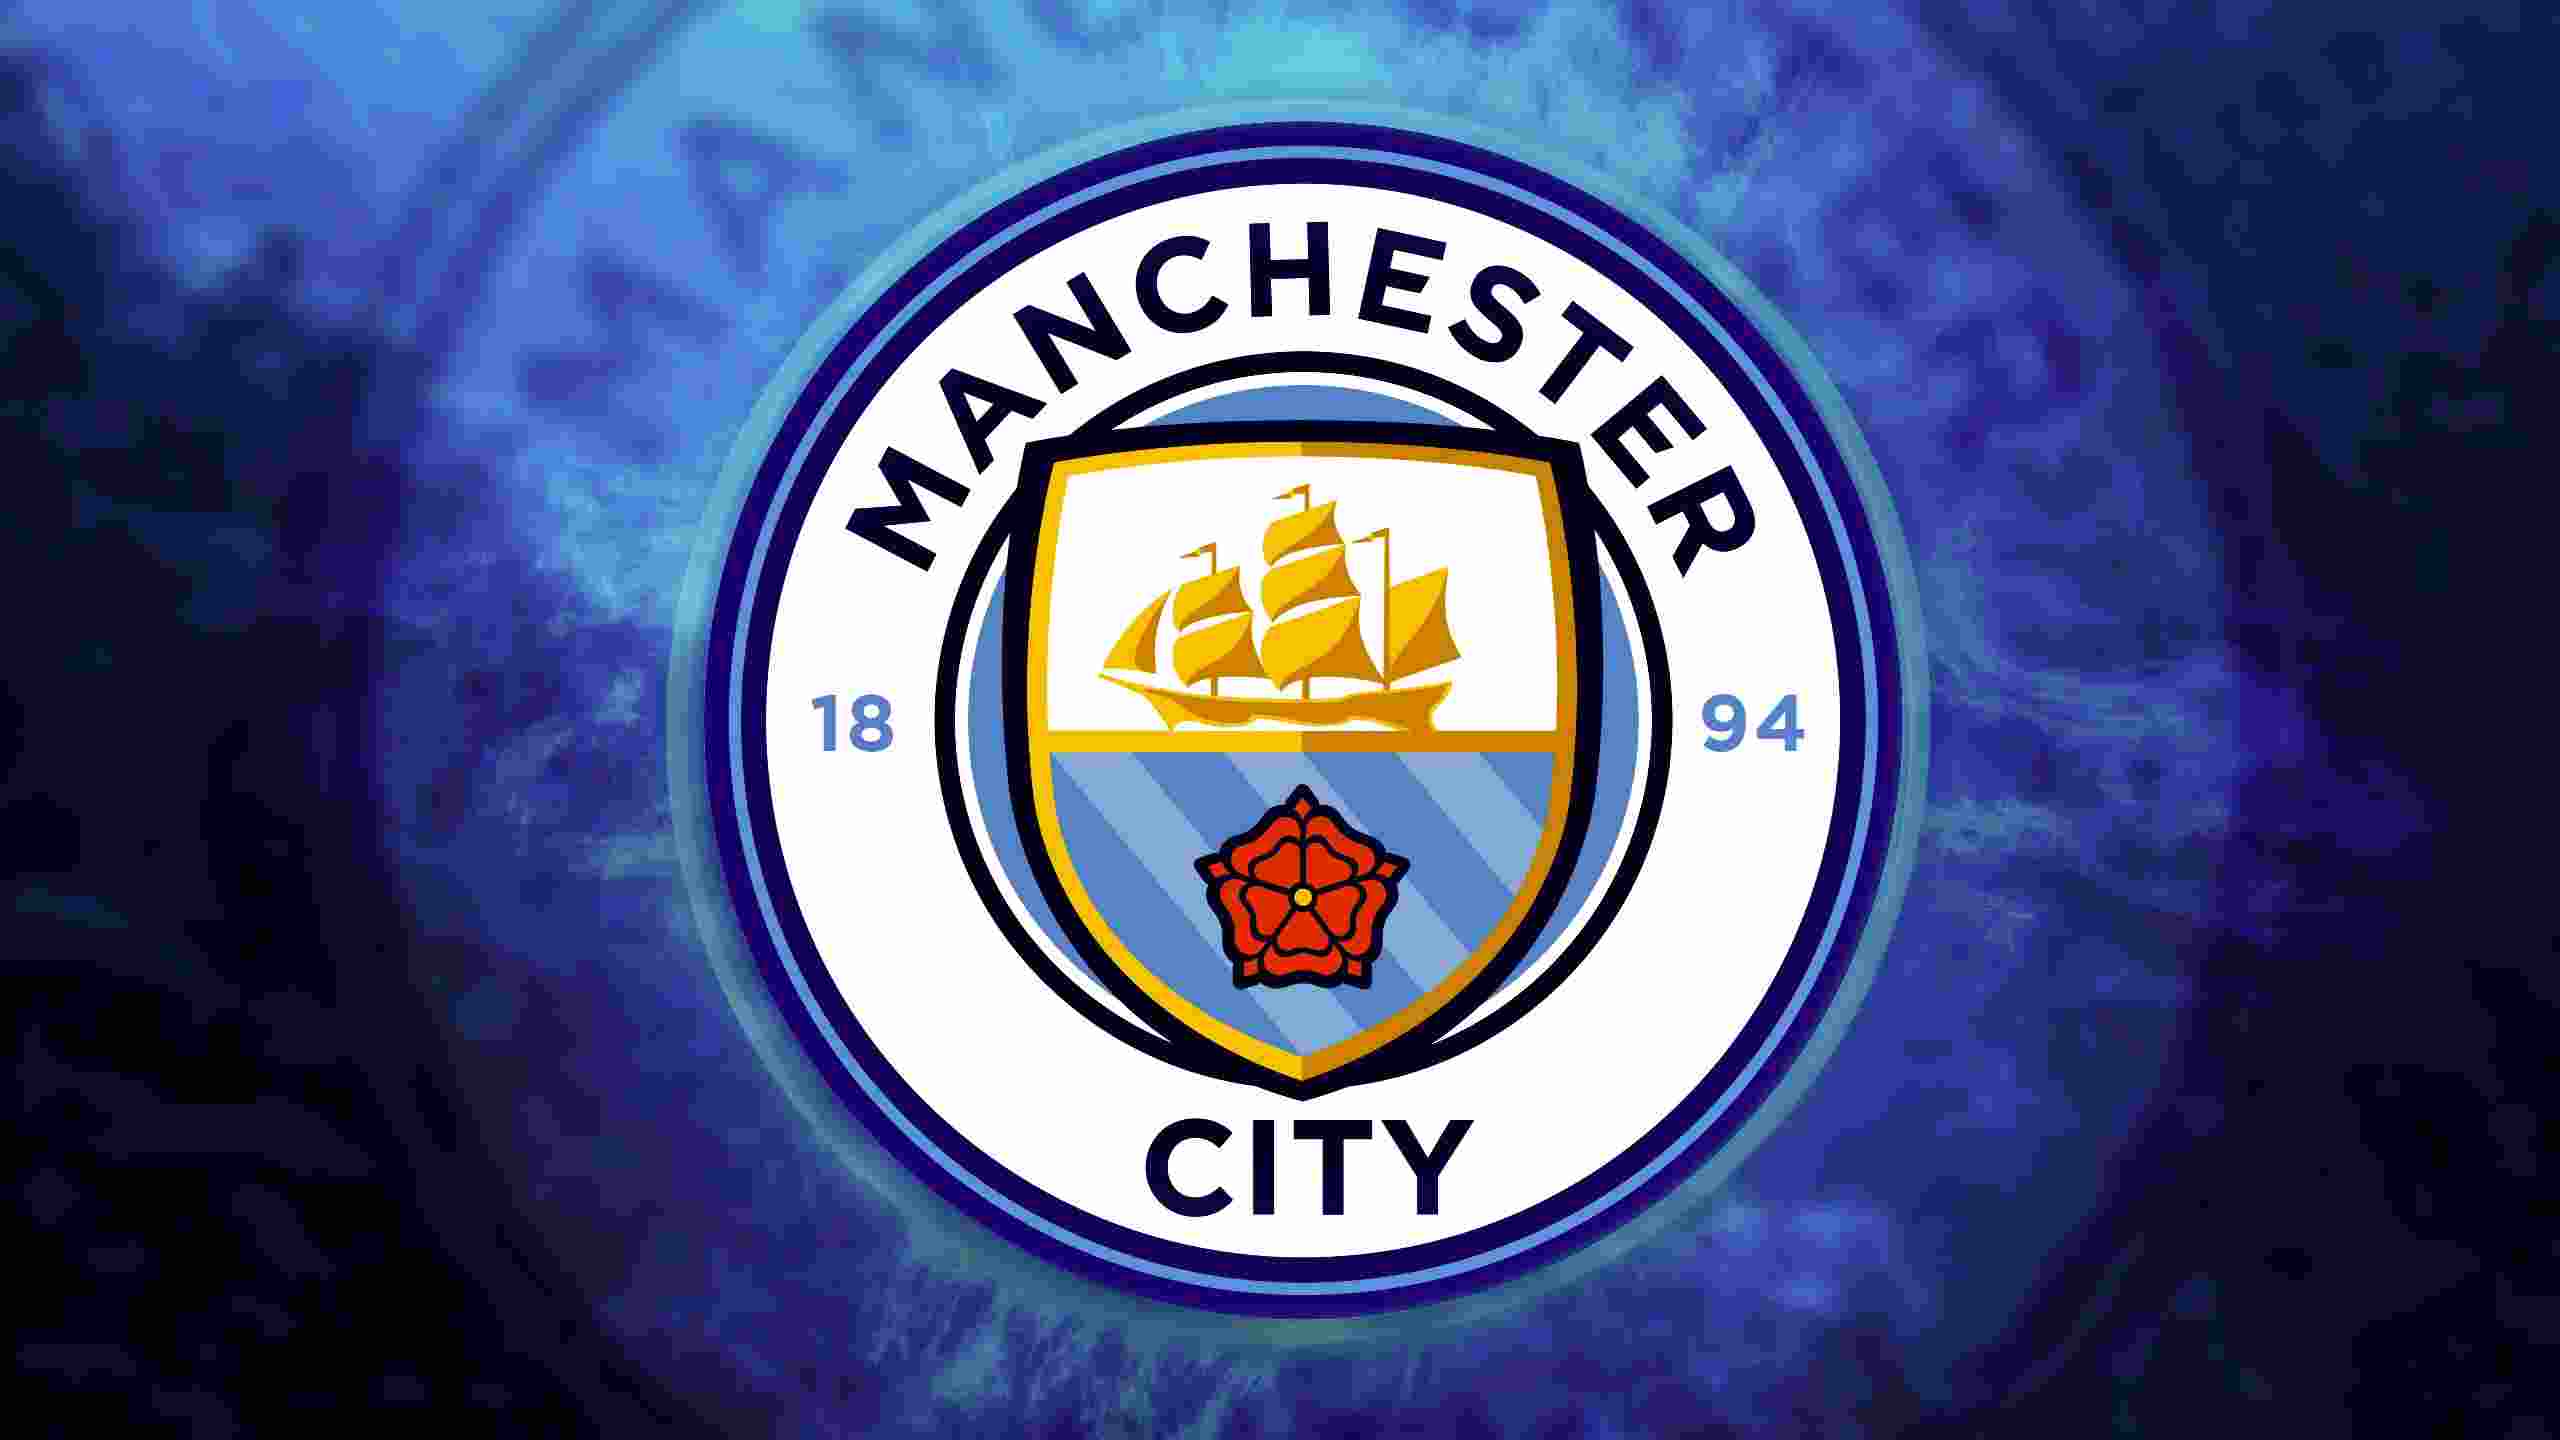 Manchester City soccer club launches fan token with Socios